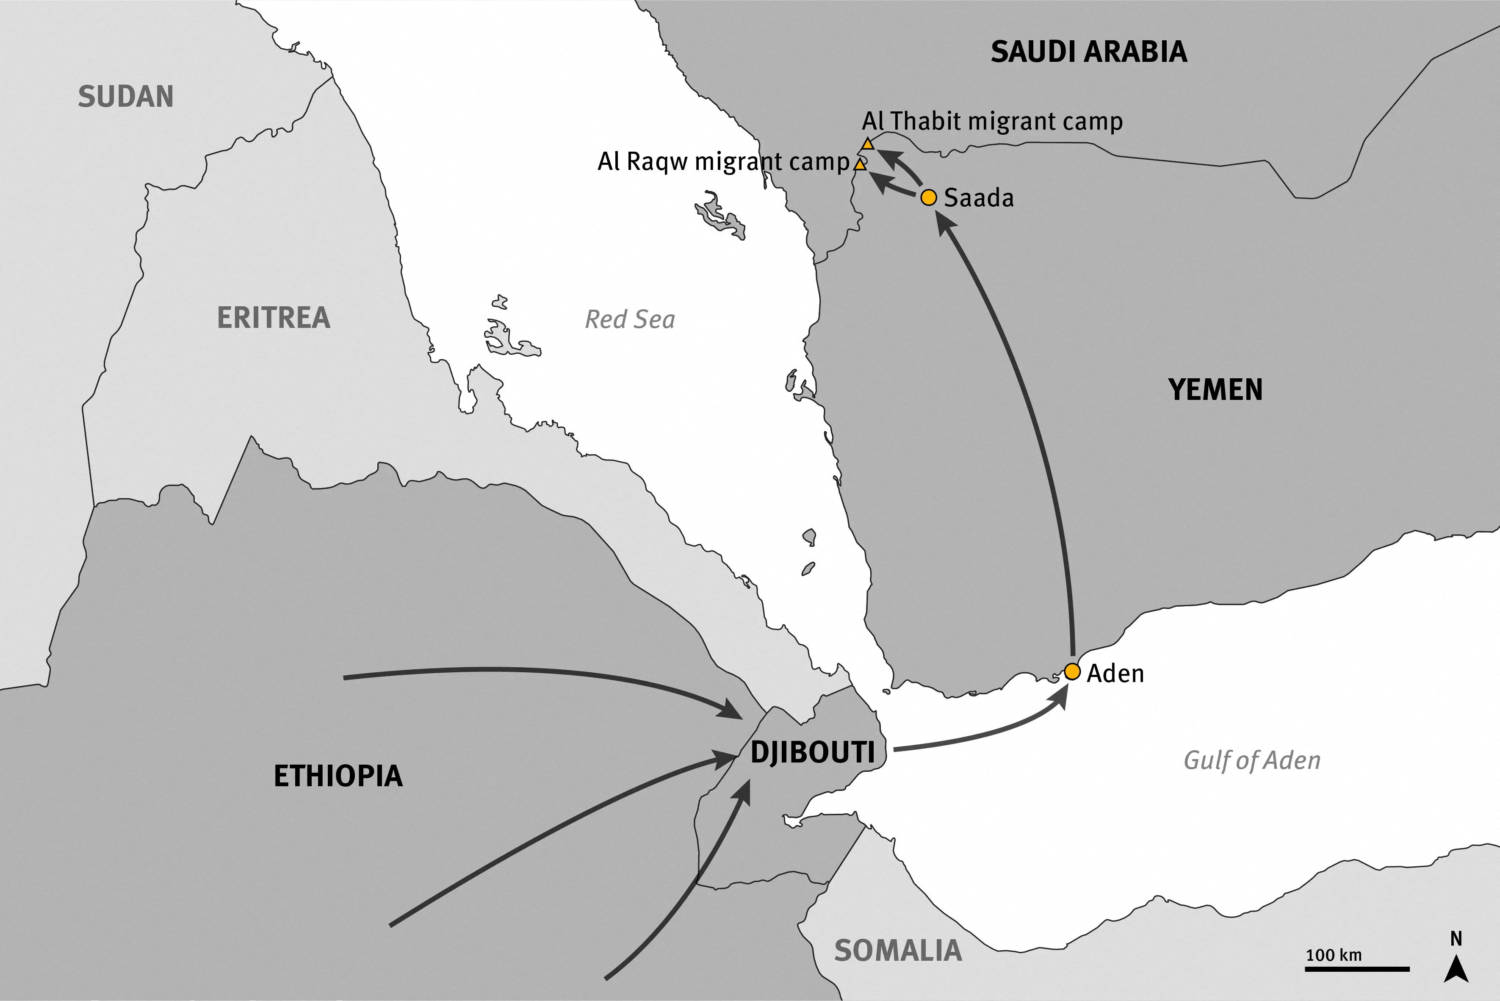 A Red Sea Map Shows Migration Route From Ethiopia To Saudi Arabia Through Yemen